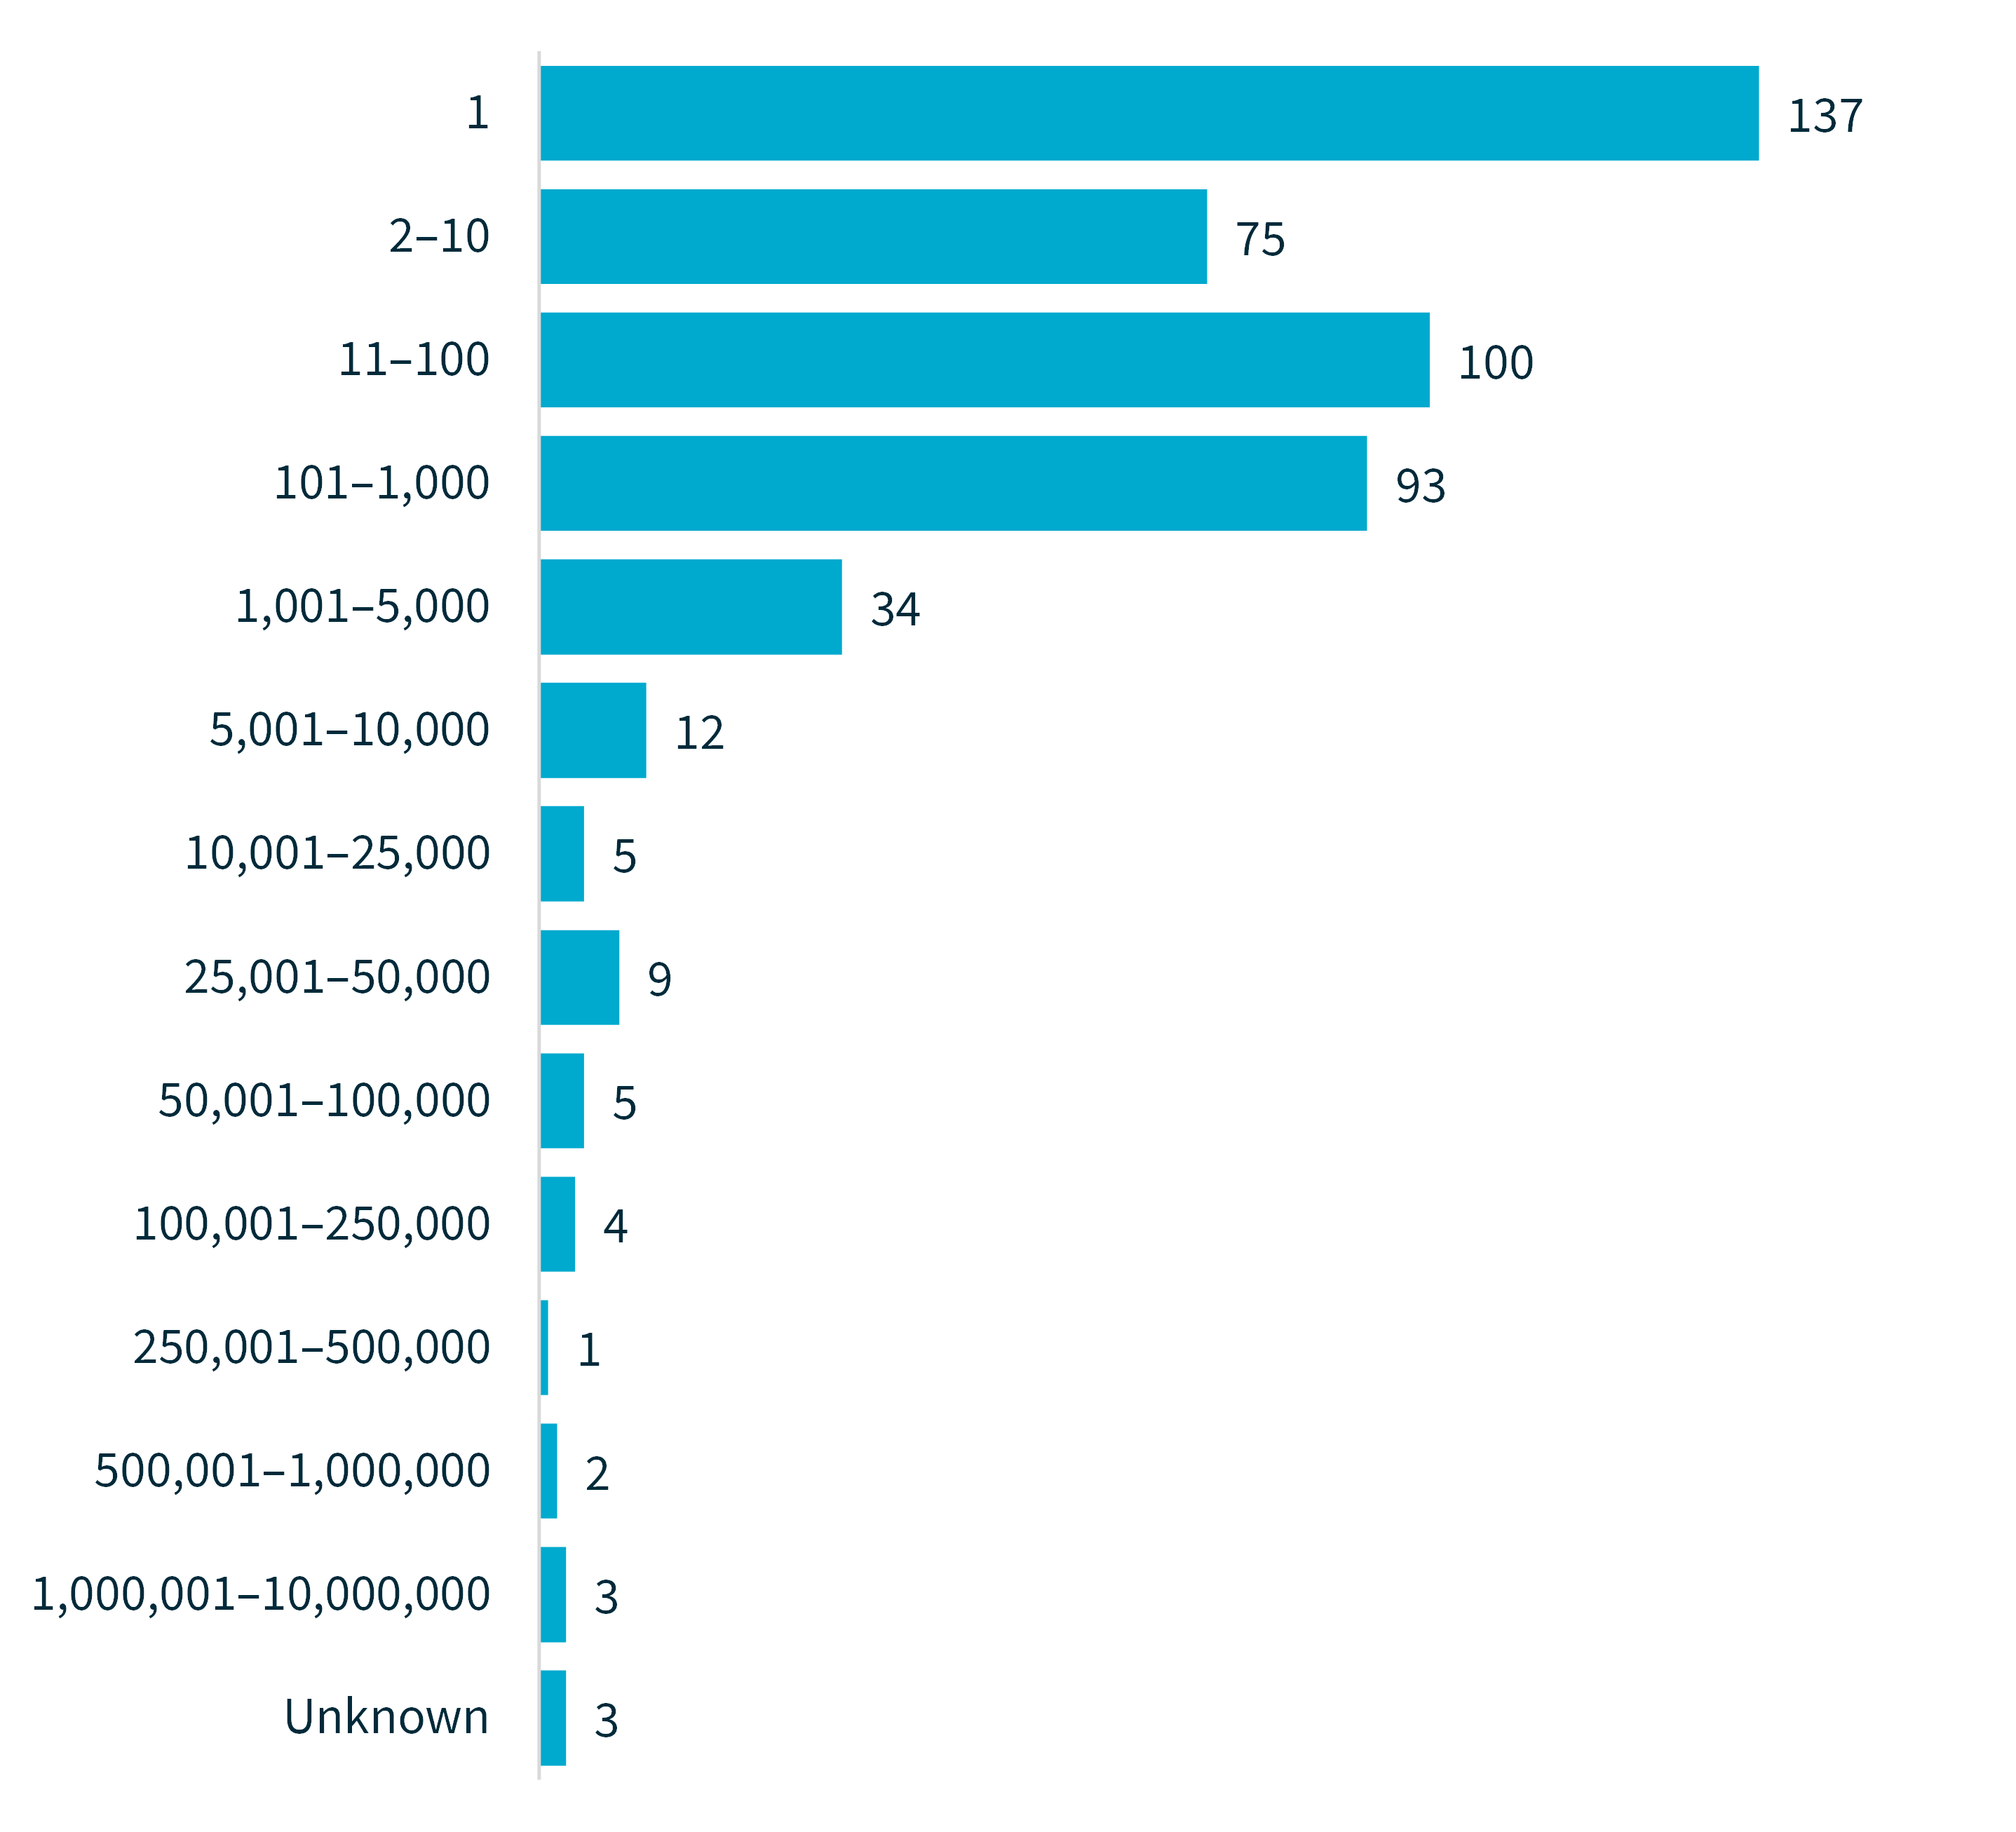 Chart 3 - Number of individuals worldwide affected by breaches